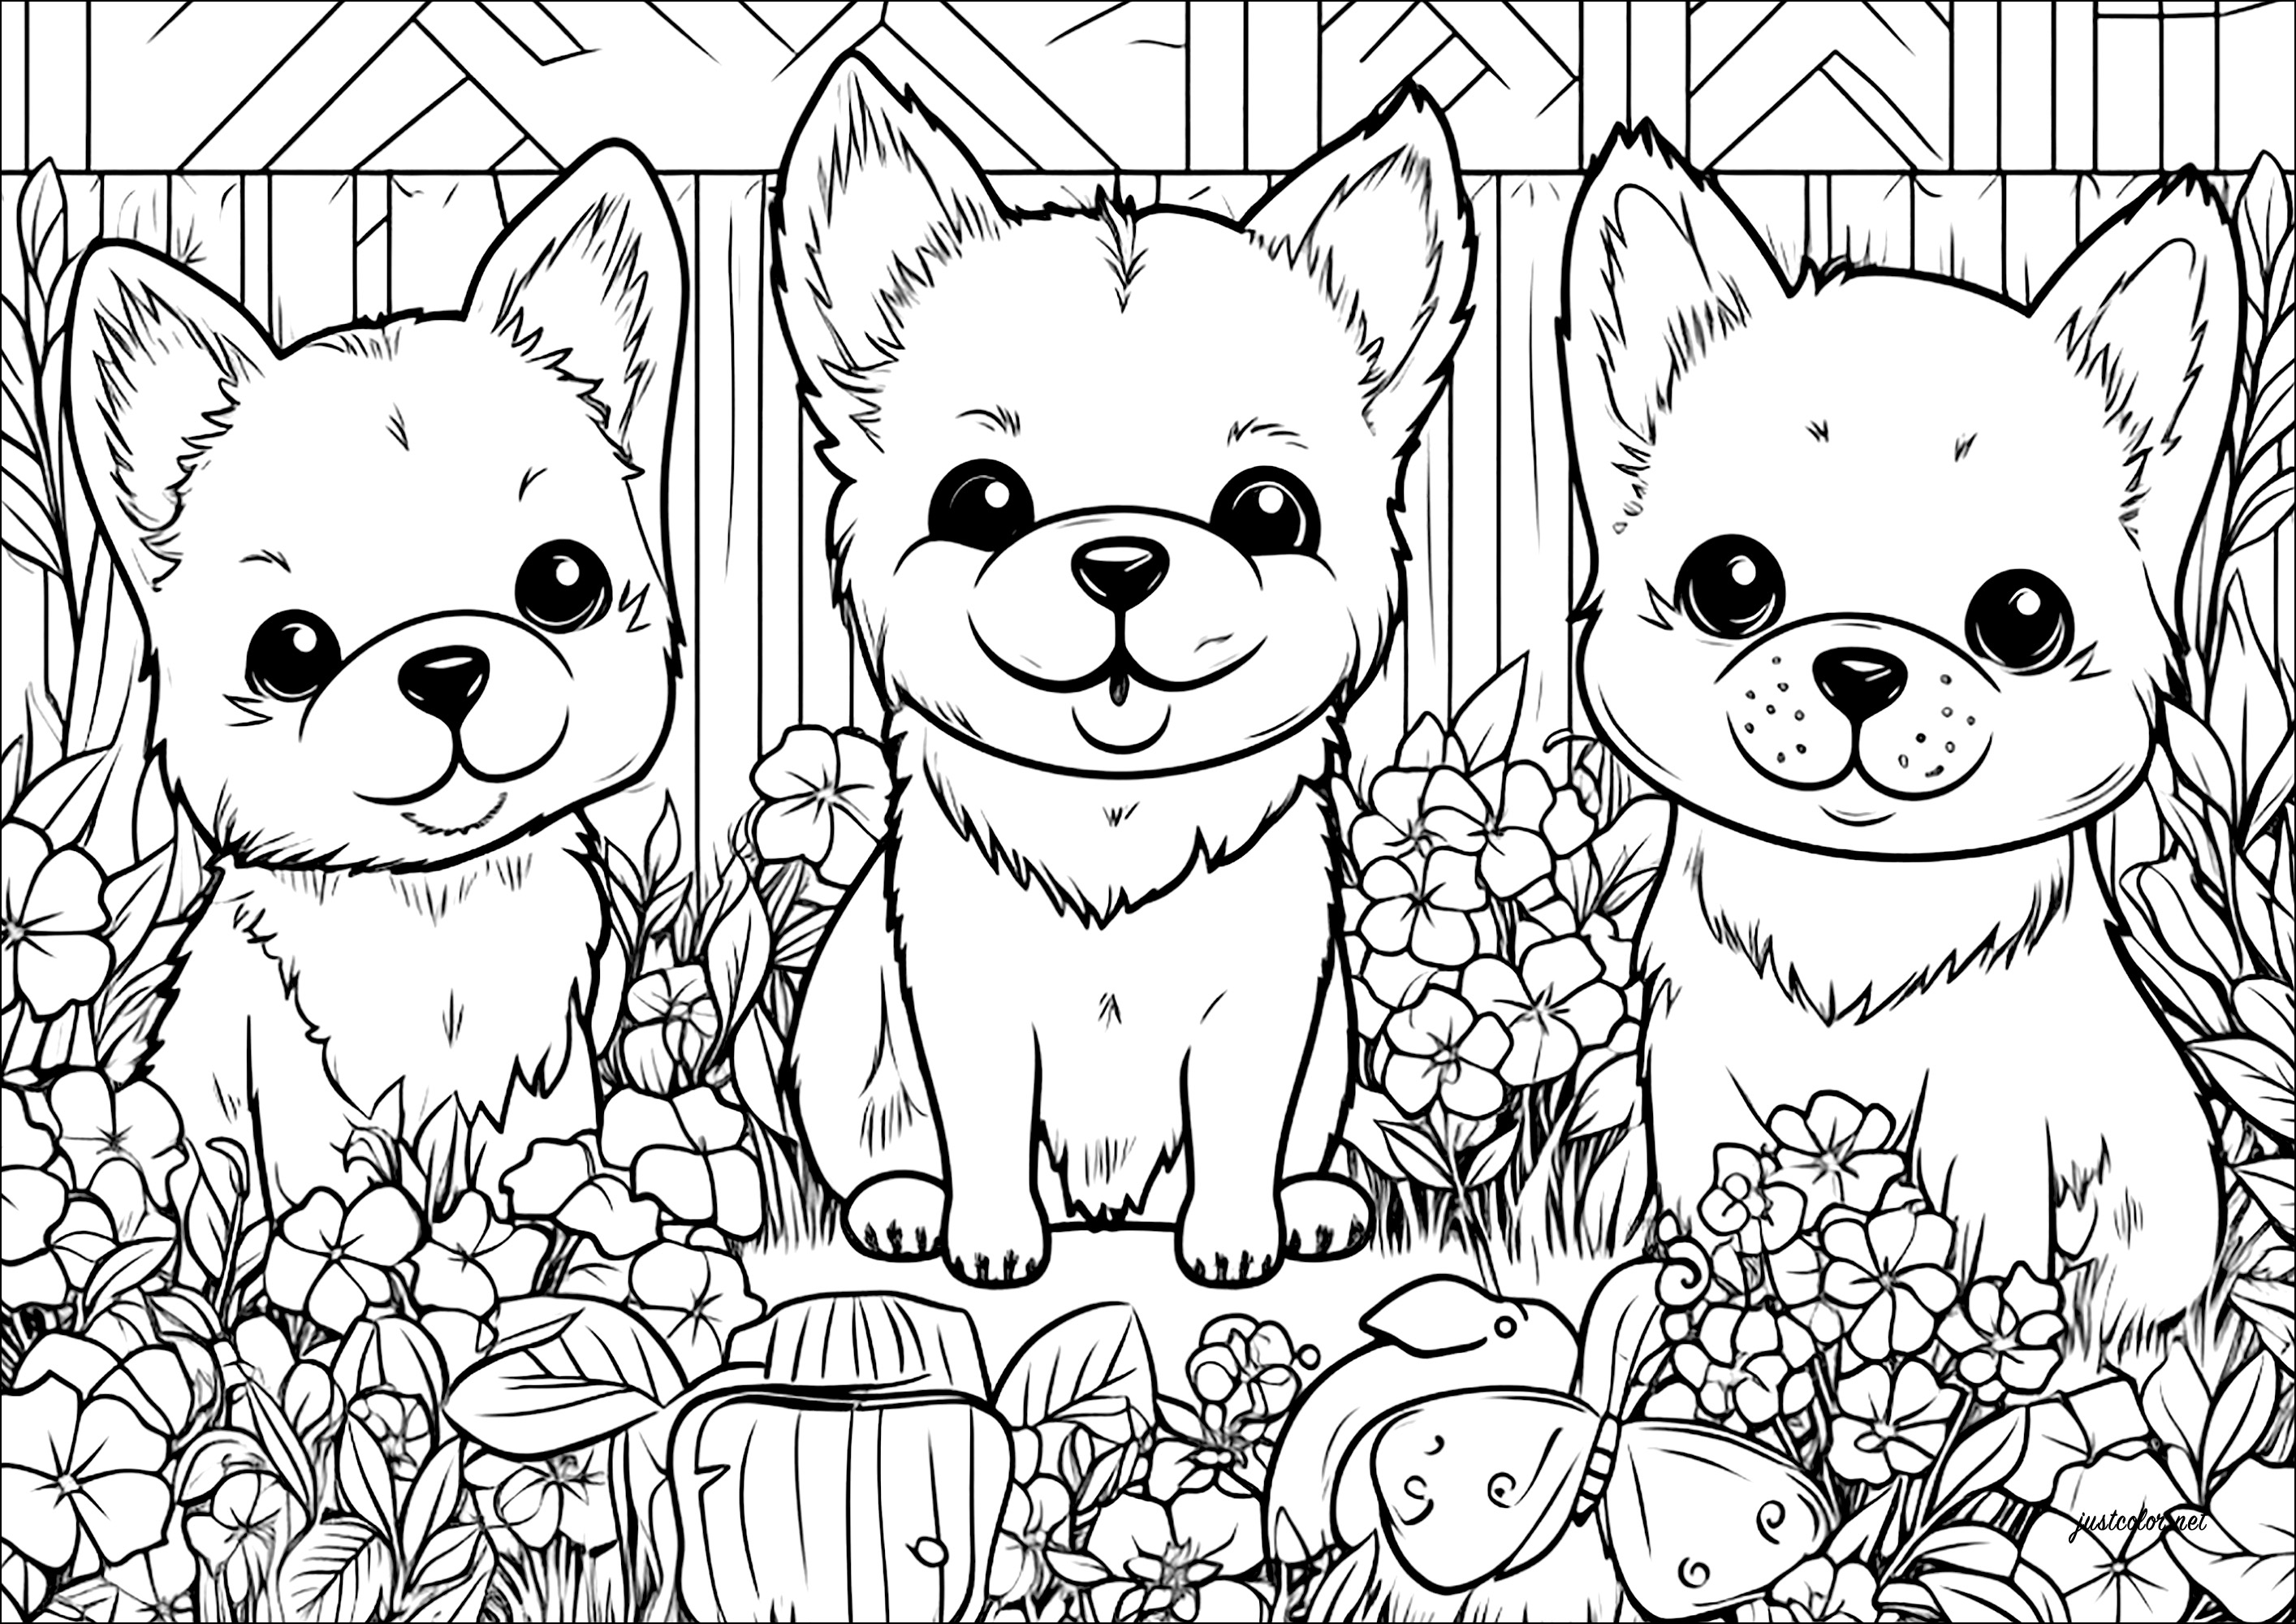 Three little dogs in a flower garden. A cute coloring page, with lots of detail on the flowers and vegetation in the garden.